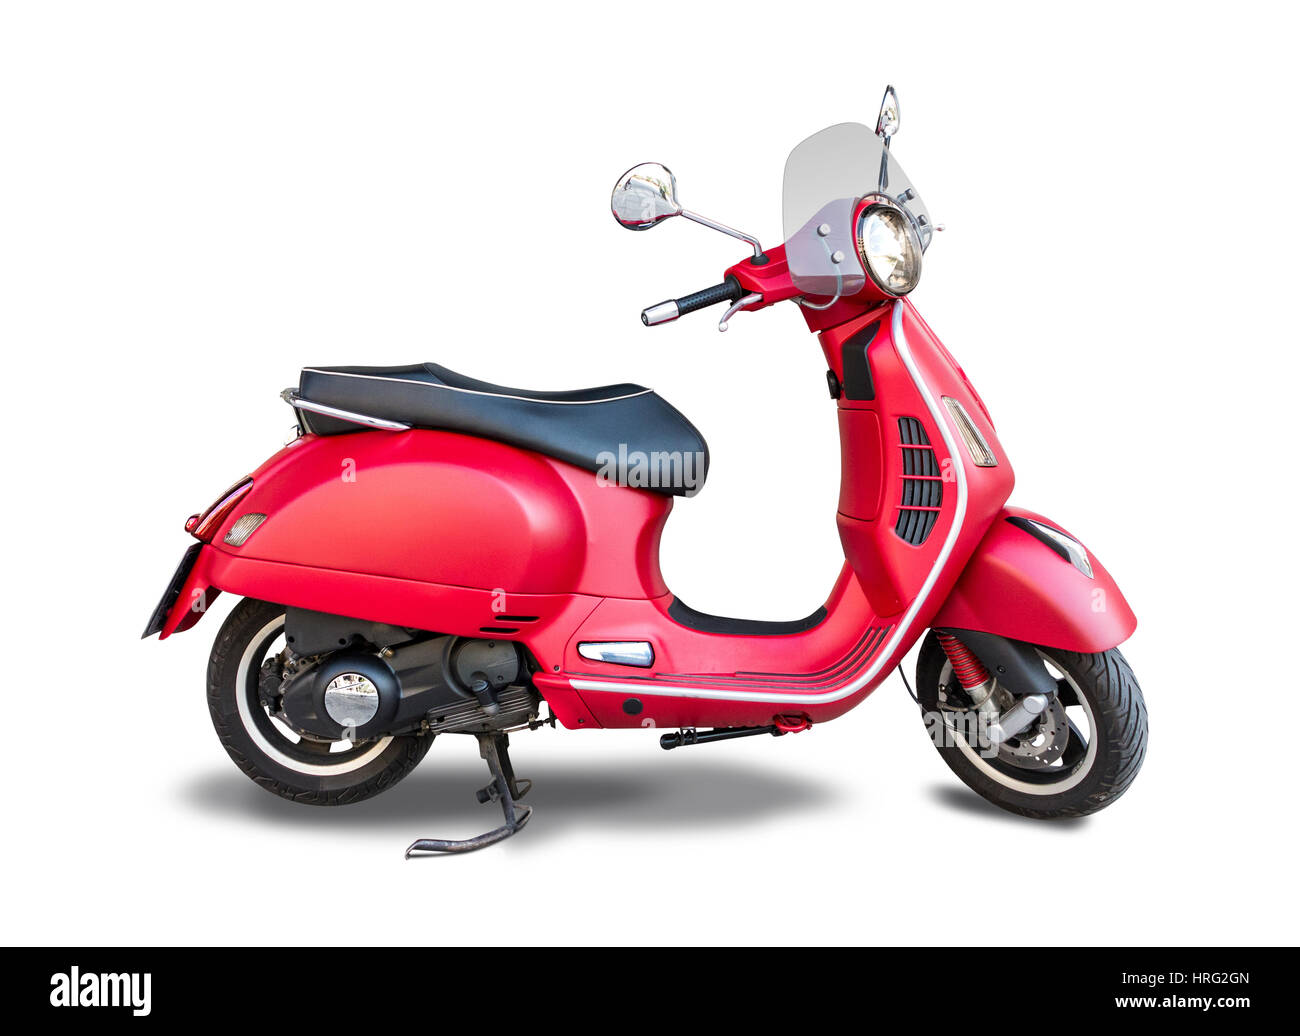 Red scooter side view isolated on white background Stock Photo